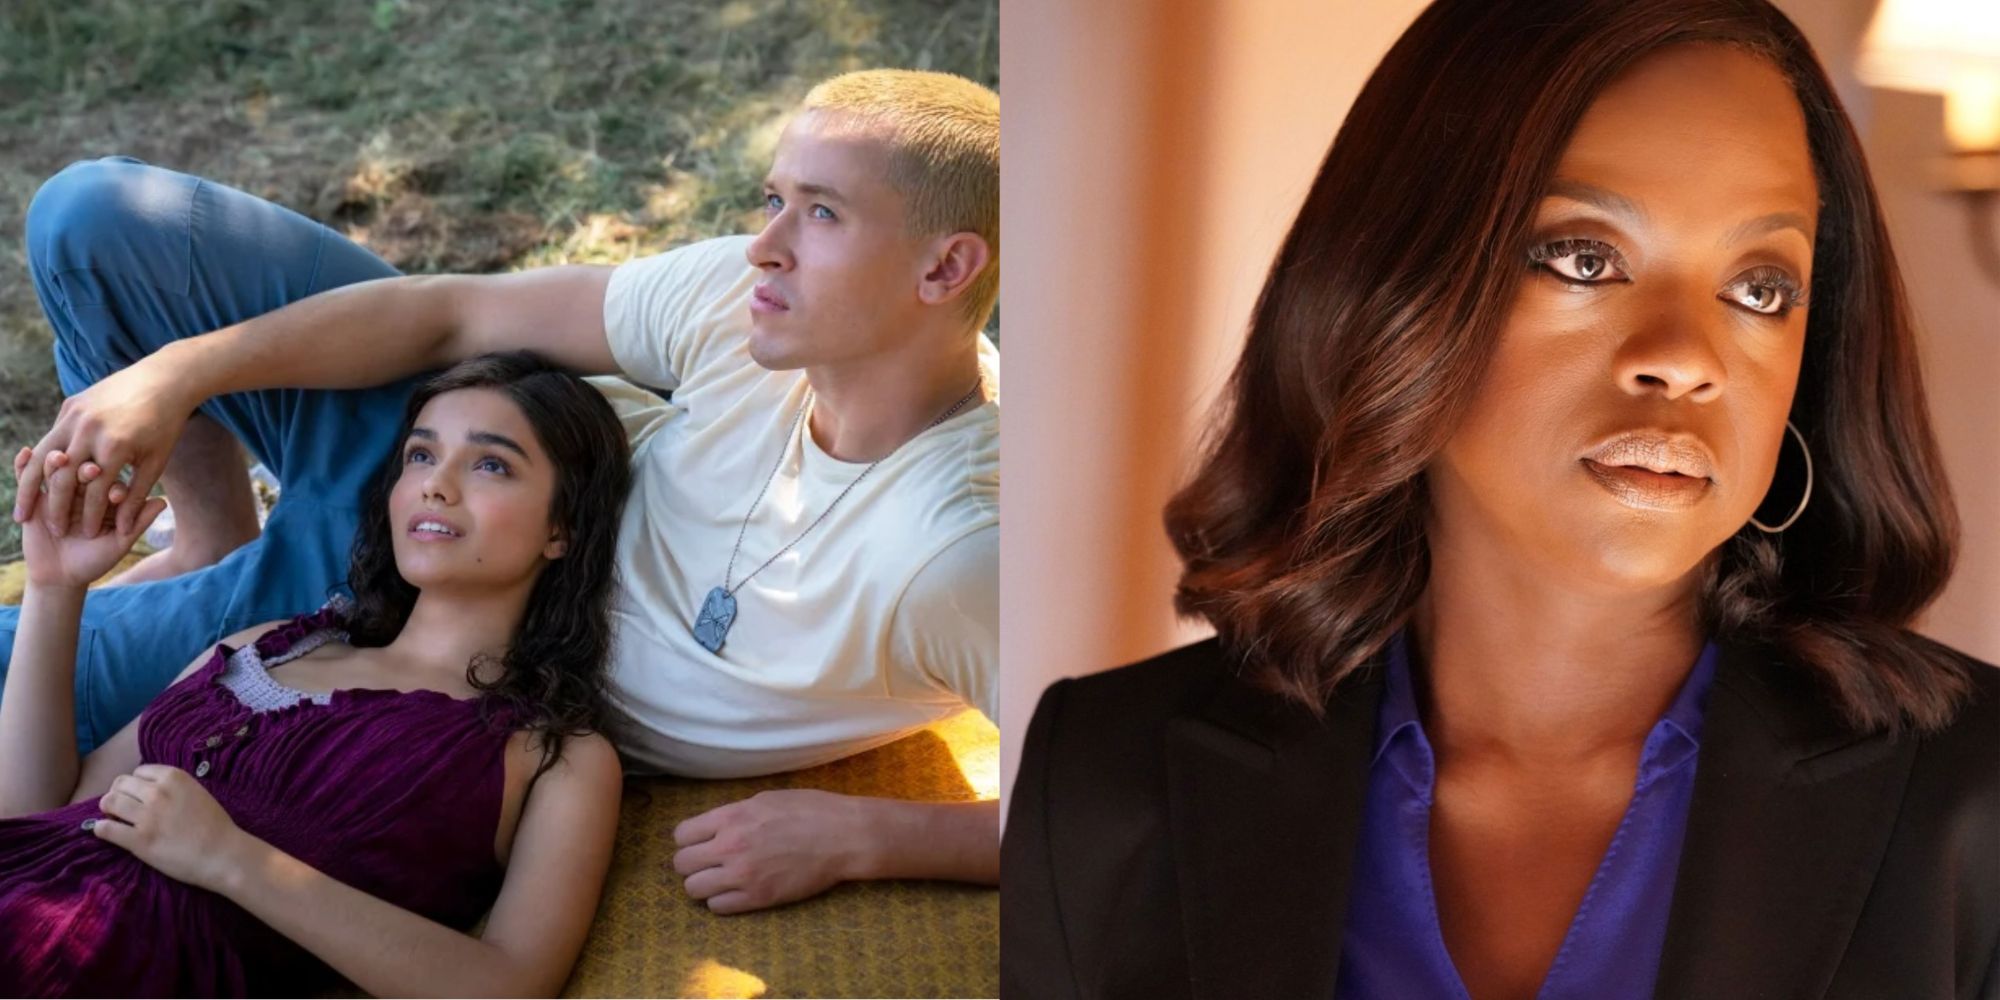 Split image of Rachel Zegler and Tom Blyth in The Ballad of Songbirds and Snakes and Viola Davis in How To Get Away With Murder